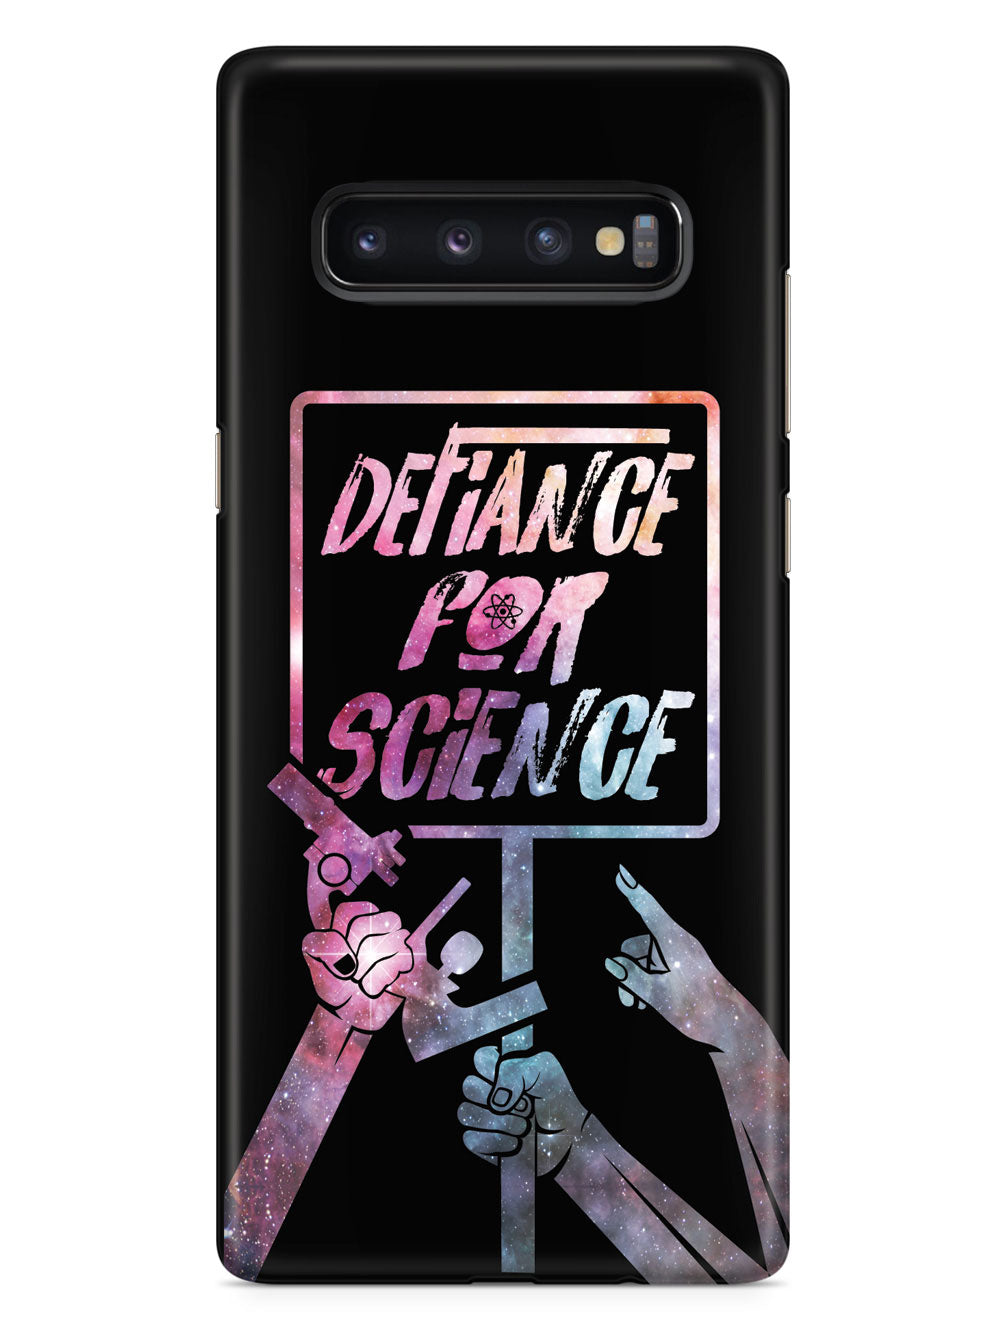 Defiance For Science - Space Background Case